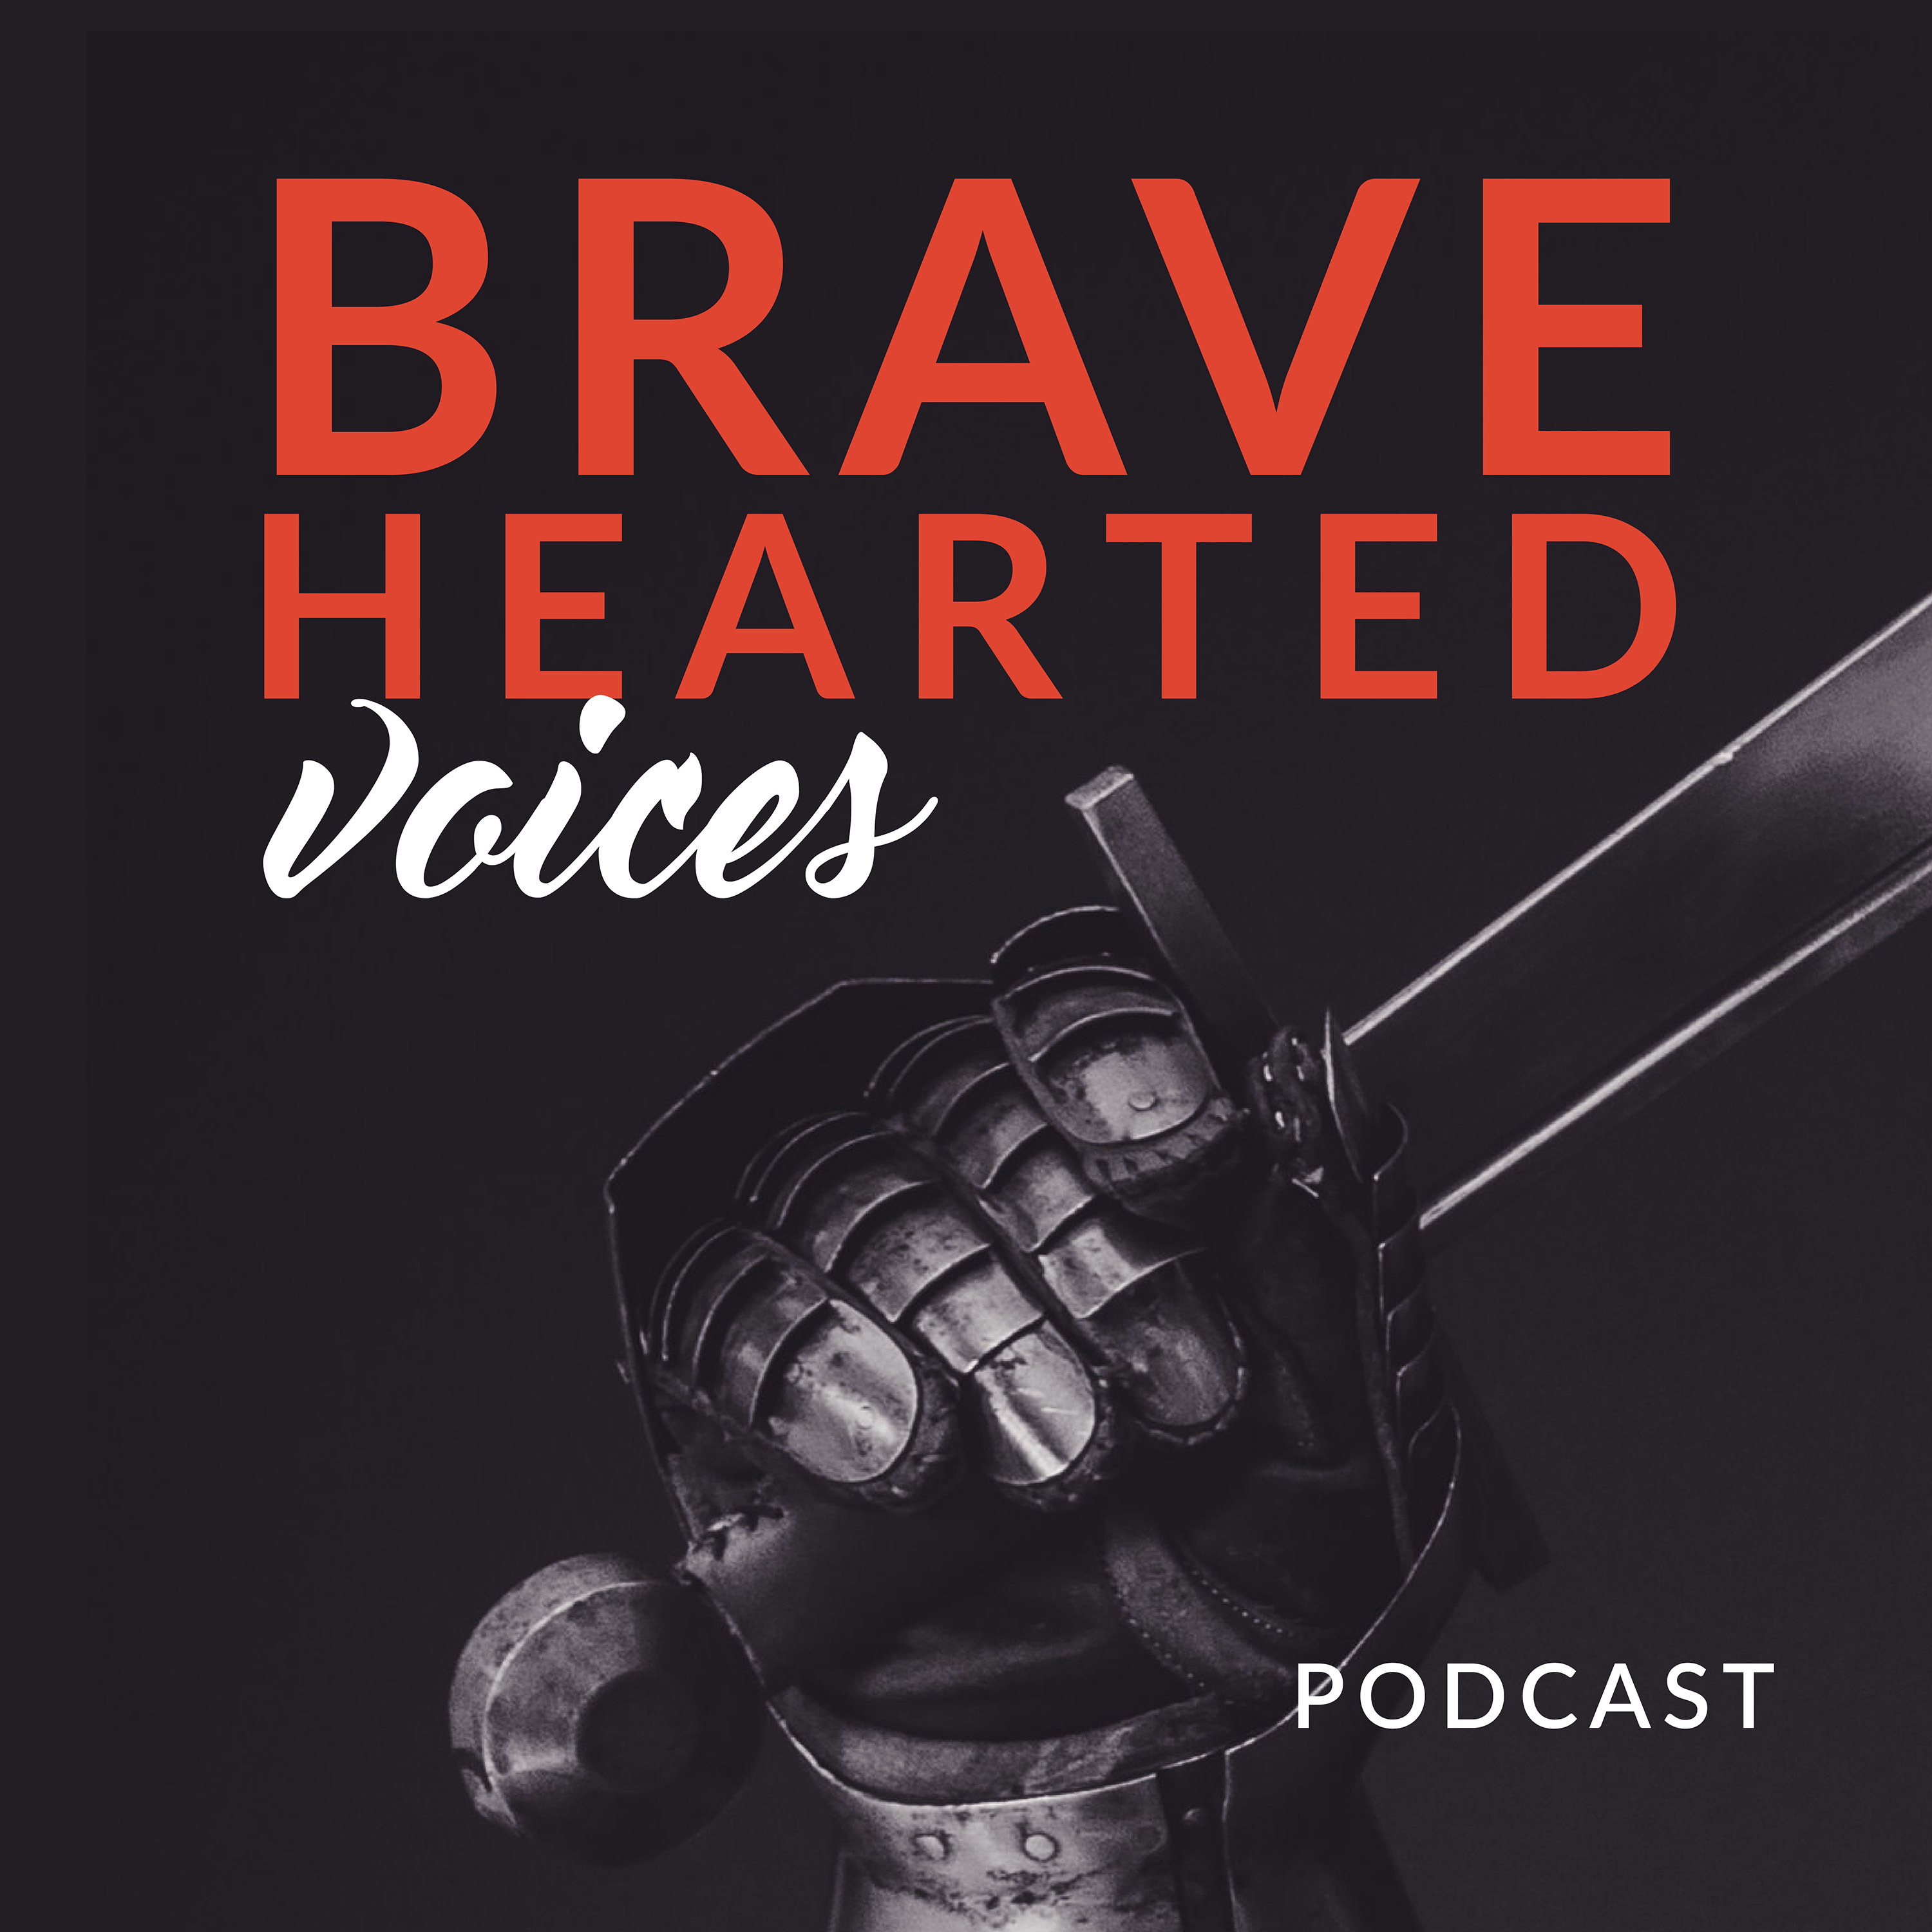 Artwork for Bravehearted Voices